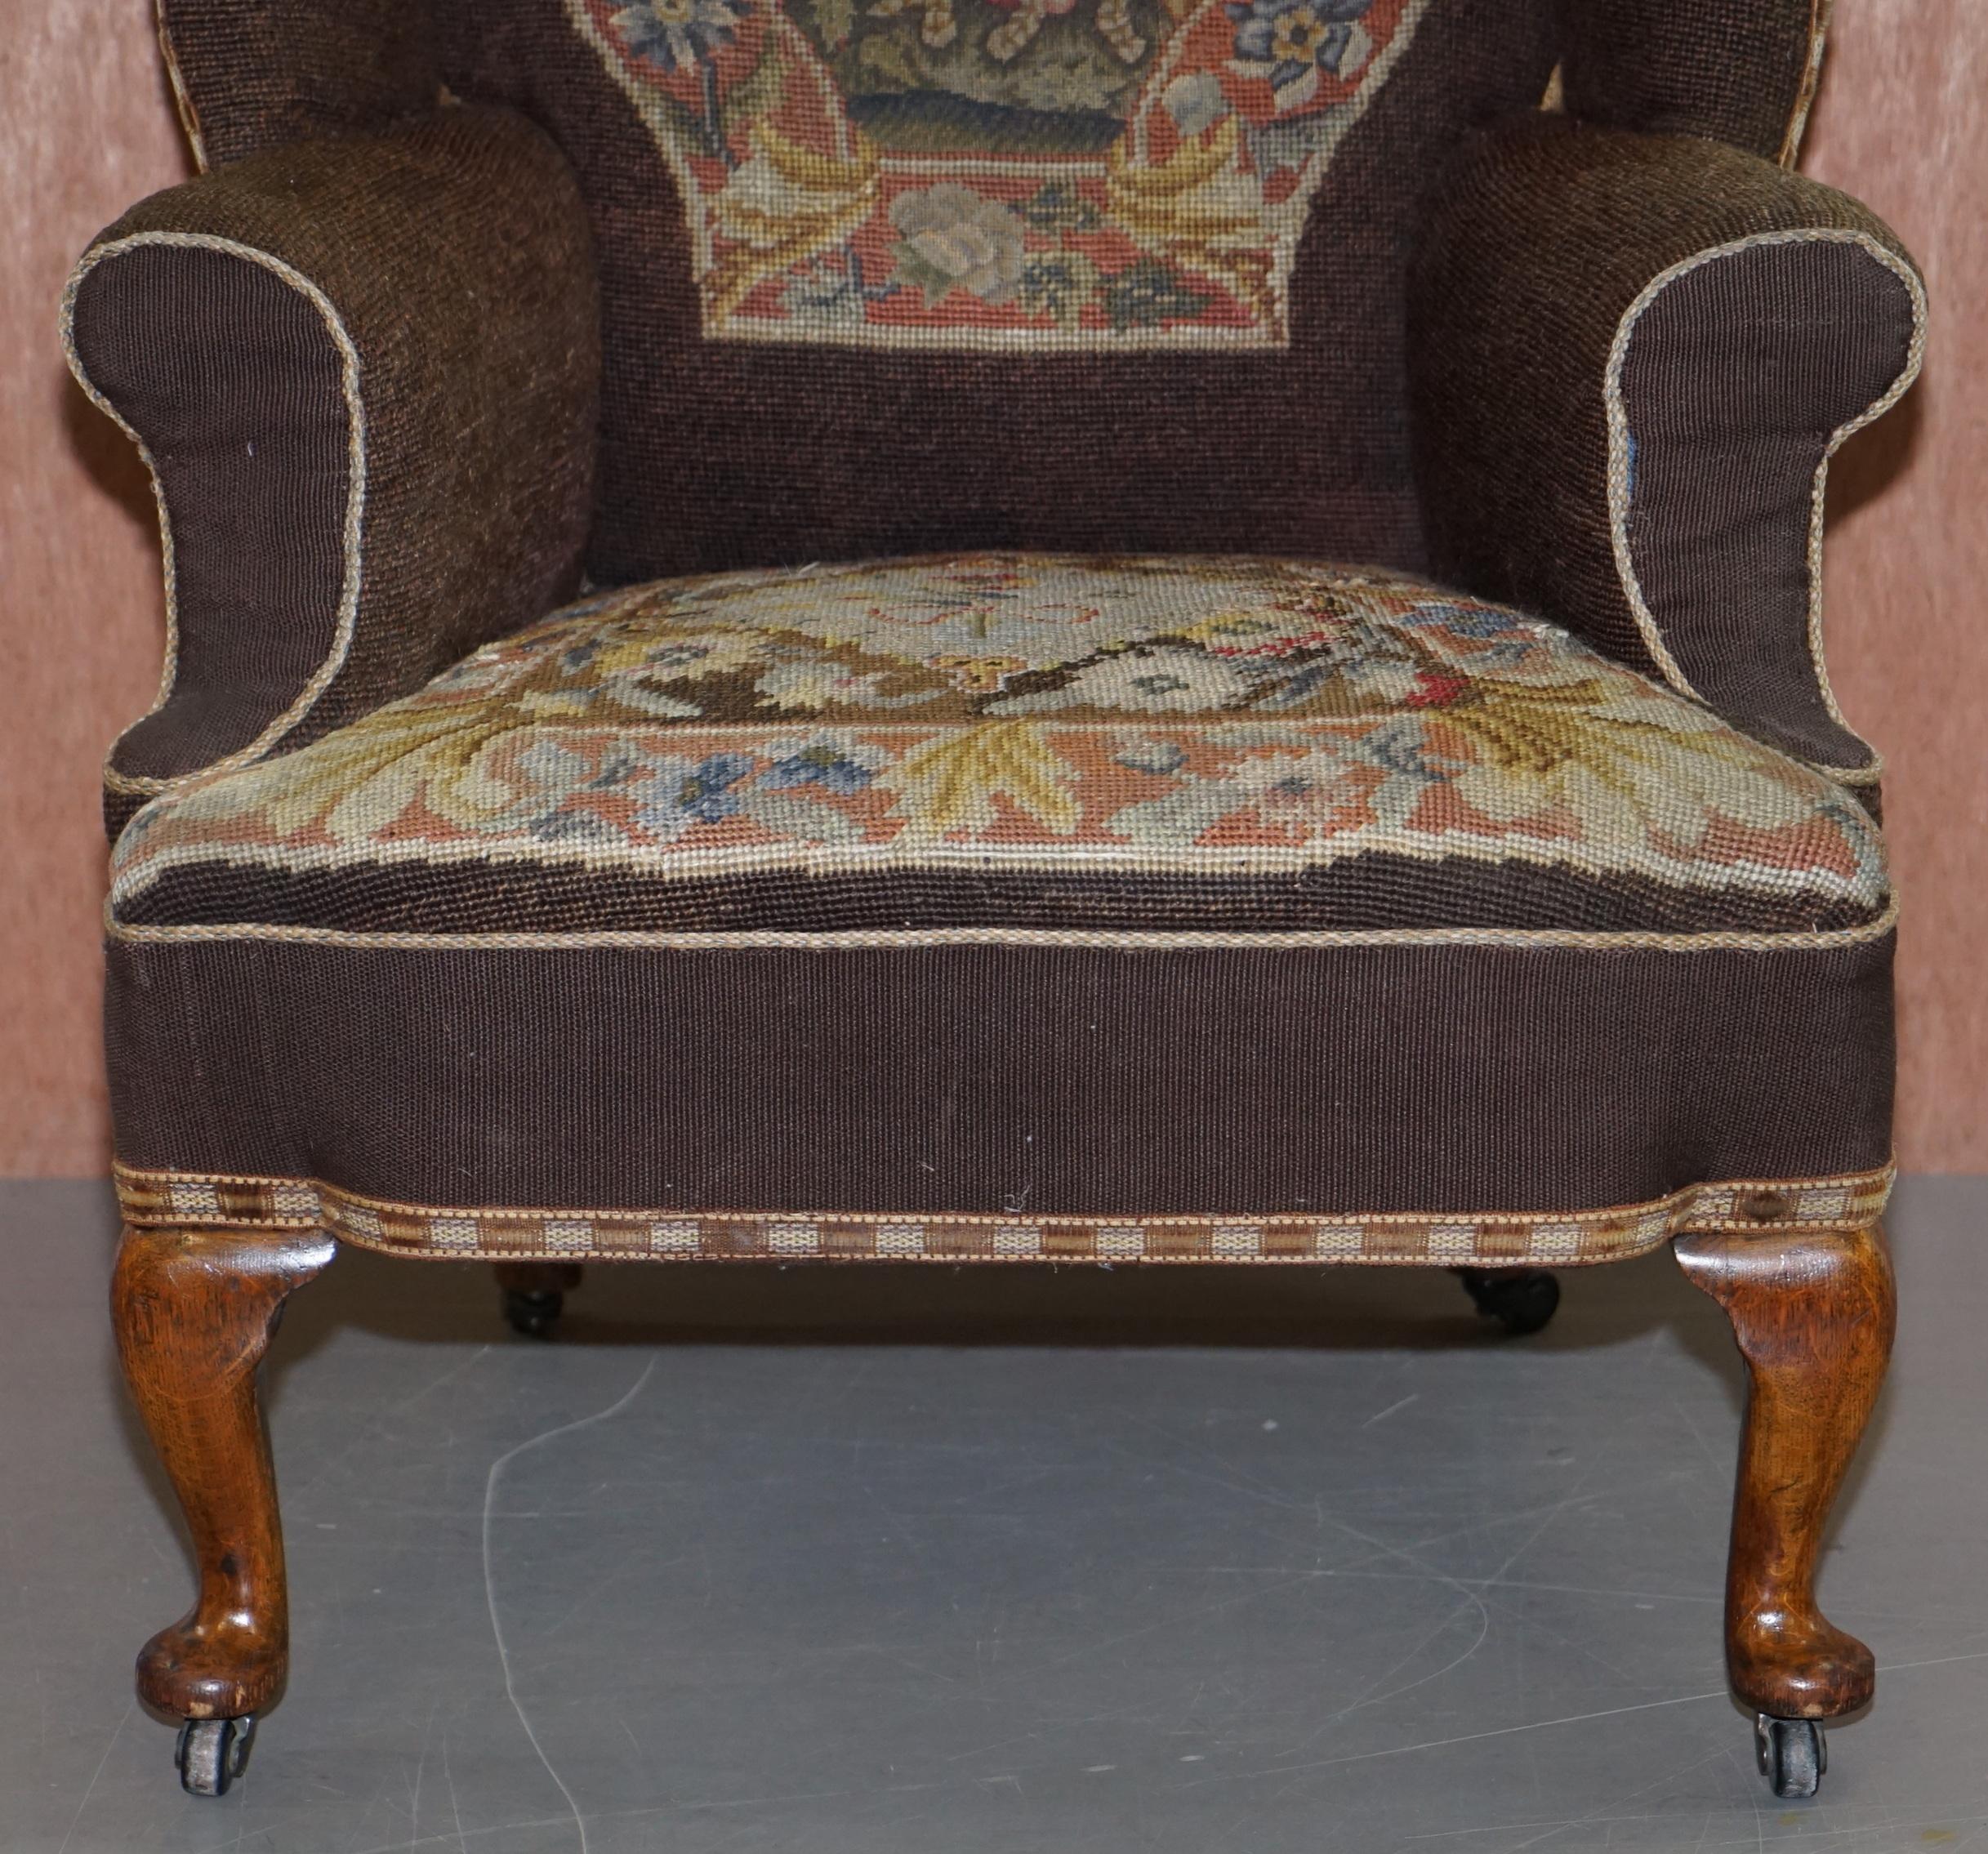 Mid-19th Century Original circa 1840 Antique Victorian Wingback Armchair Embroidered Upholstery For Sale